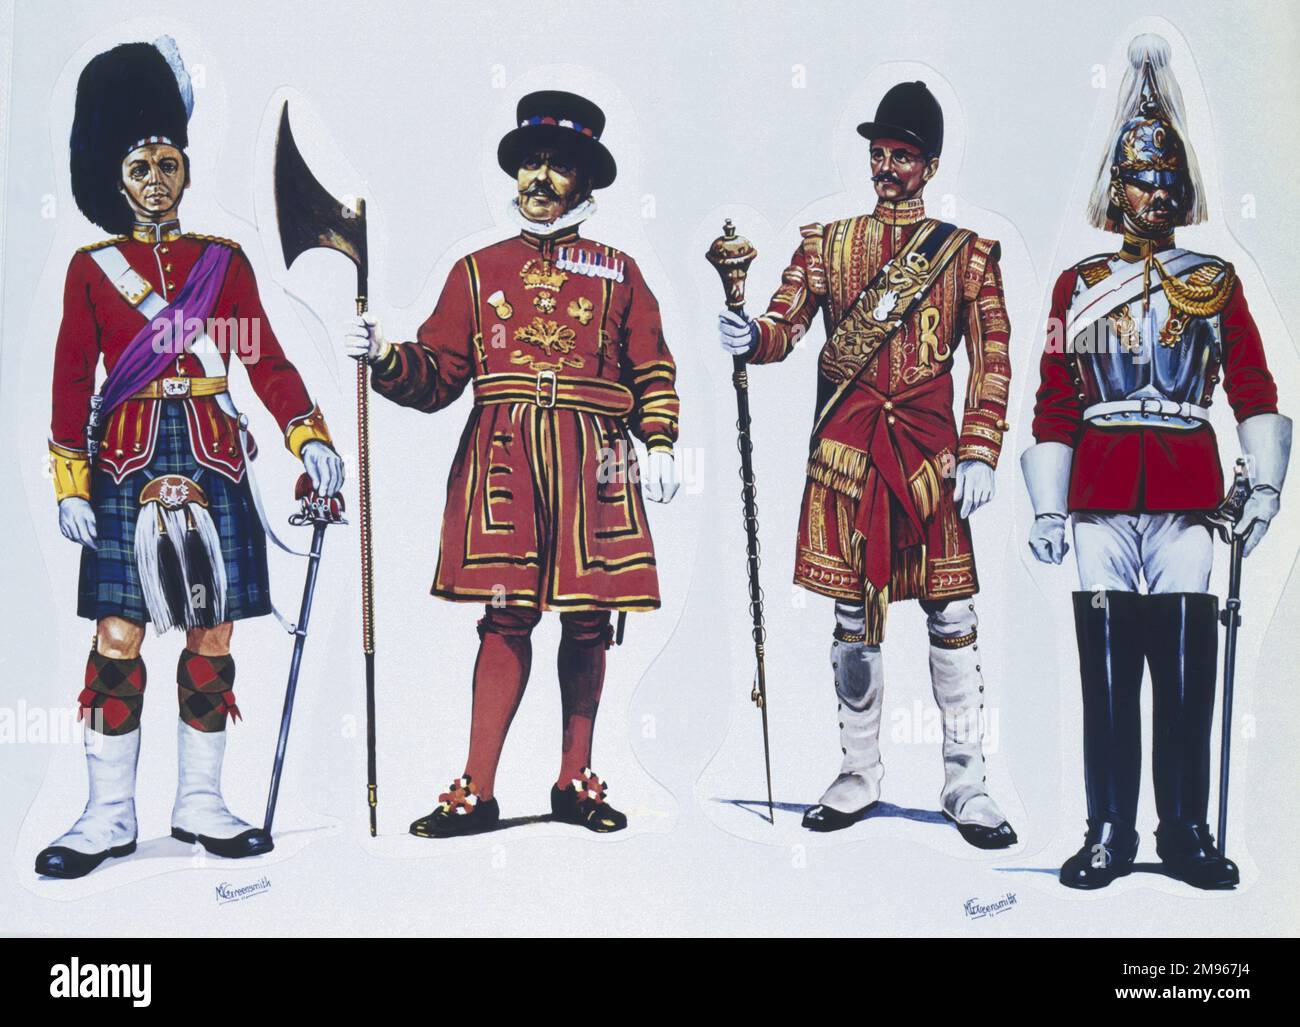 (Left to right) Officer from the Gordon Highlanders - A Yeoman Warder of the Tower of London (Yeoman Gaoler) - Drum Major from The Grenadier Guards - Corporal from The Life Guards. Painting by Malcolm Greensmith Stock Photo